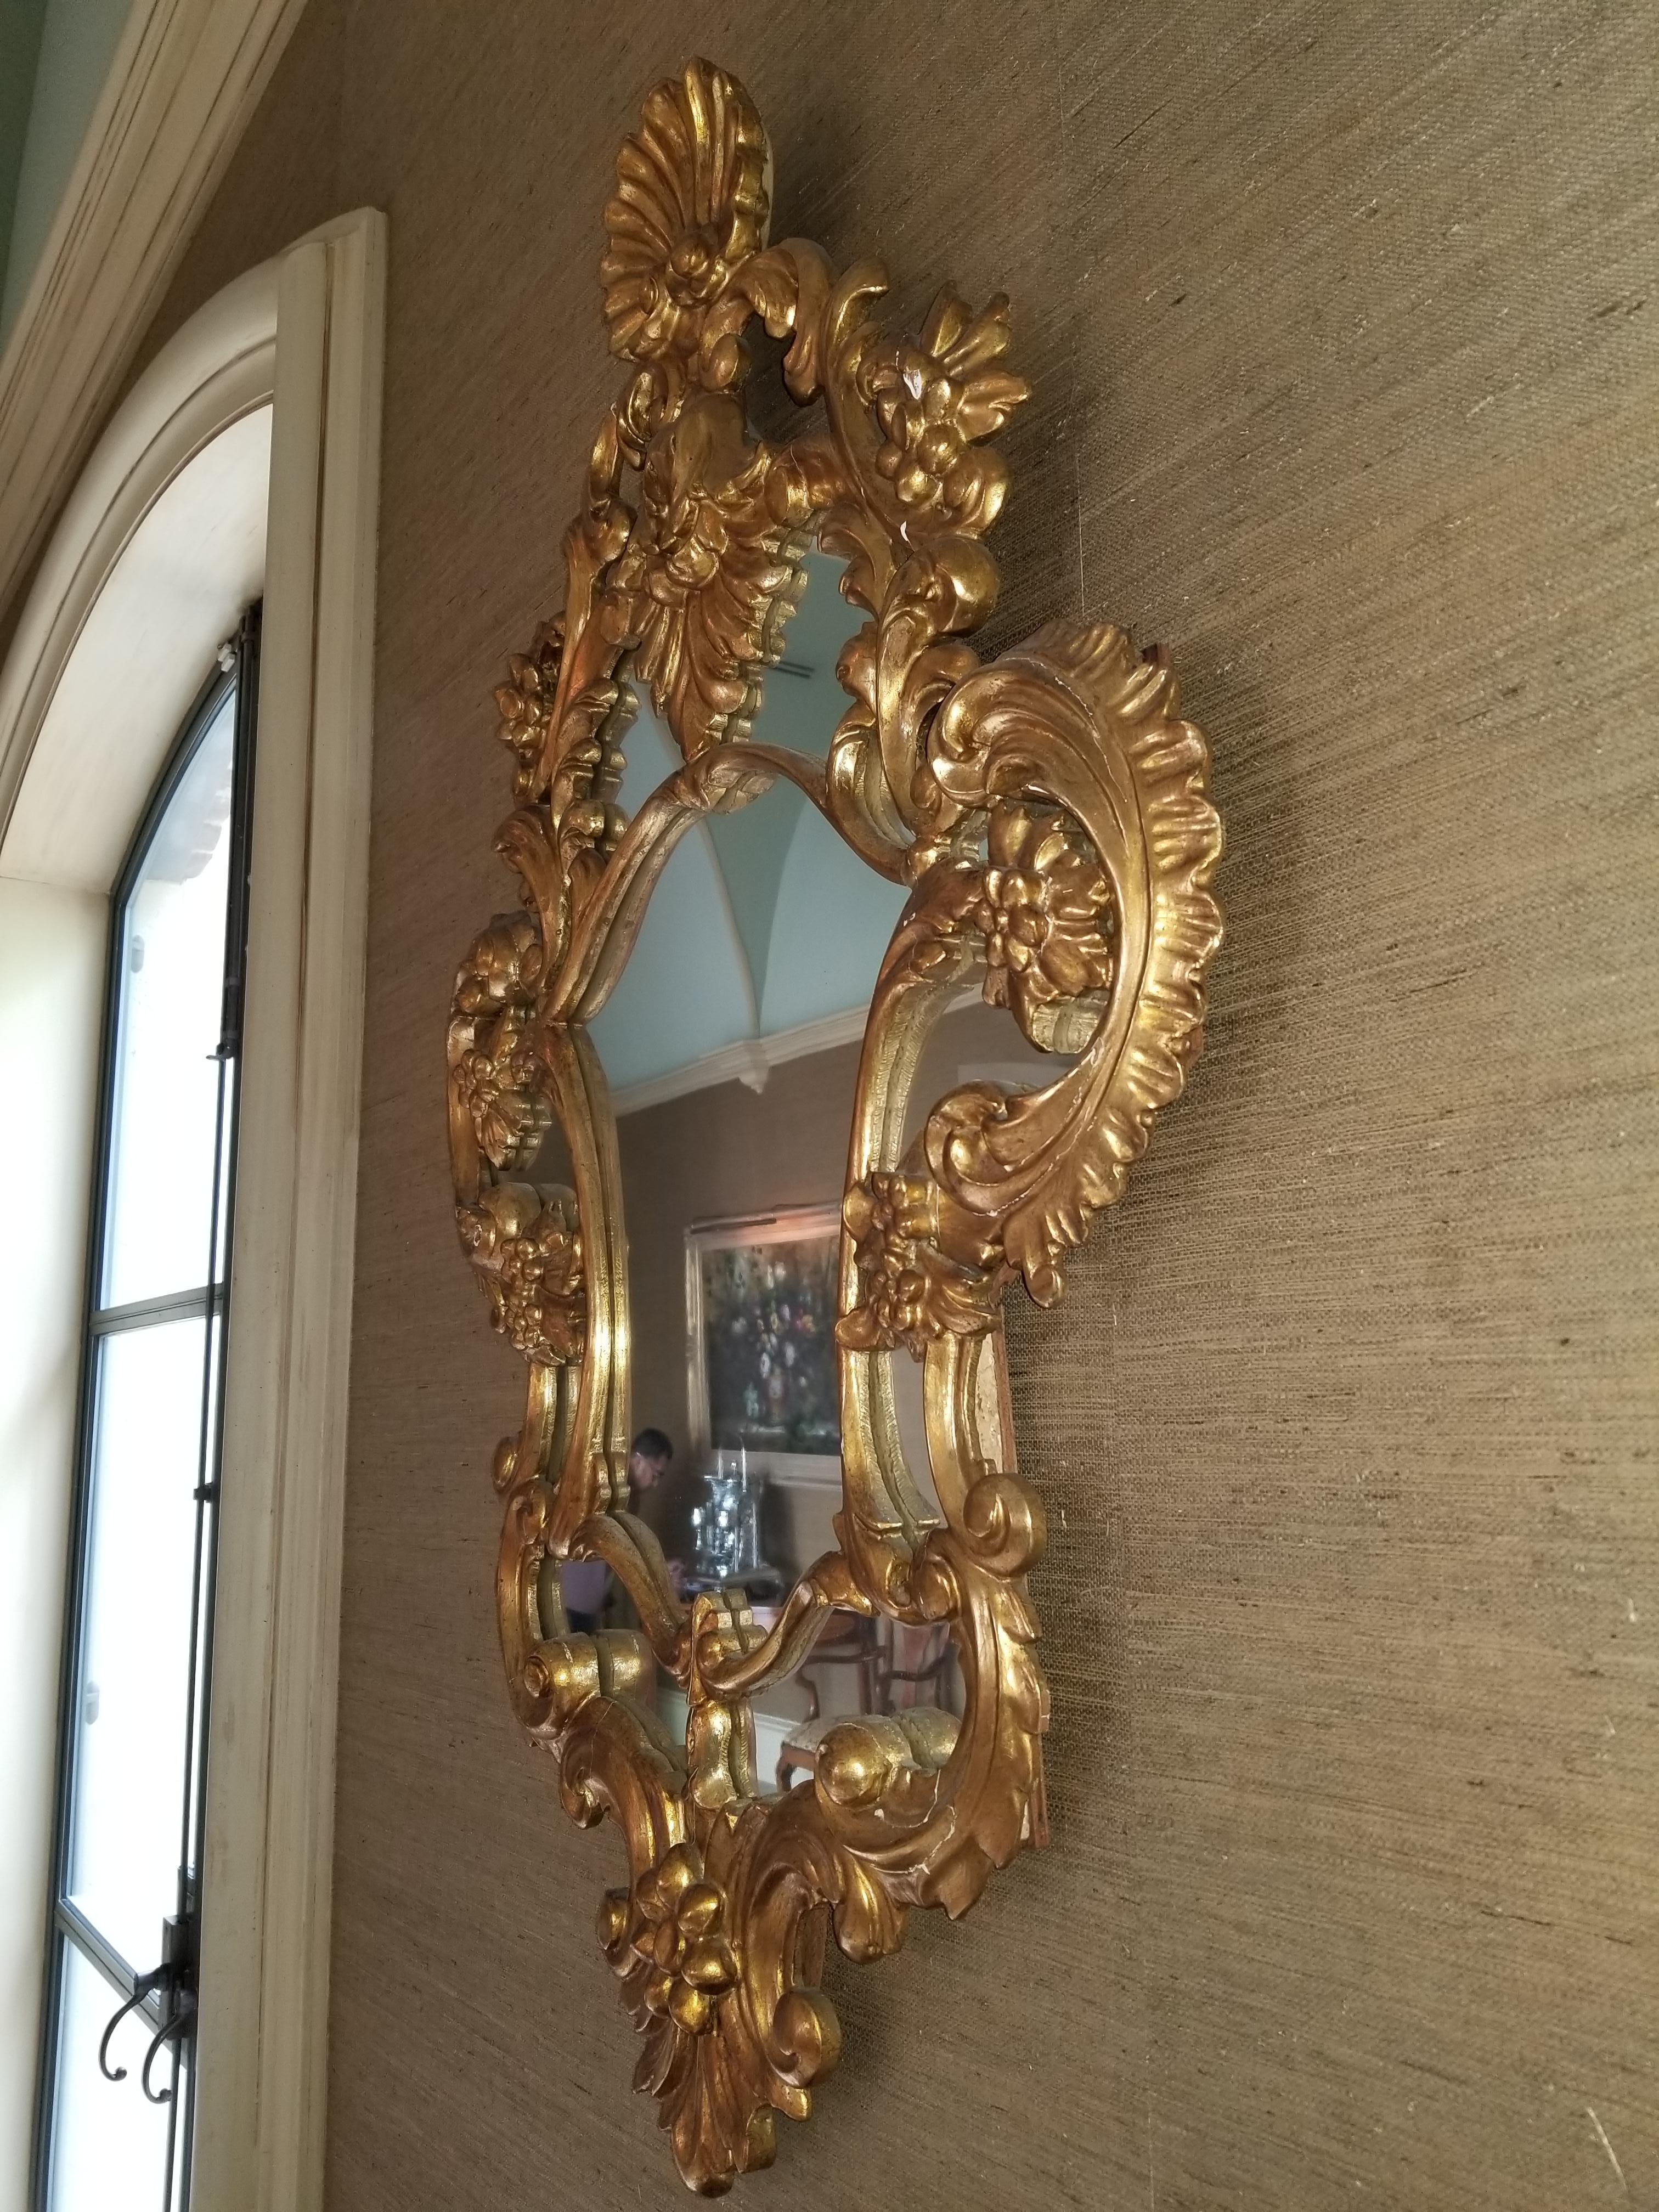 Pair of Giltwood Mirrors with a Shell Motif at Top, 20th Century 1